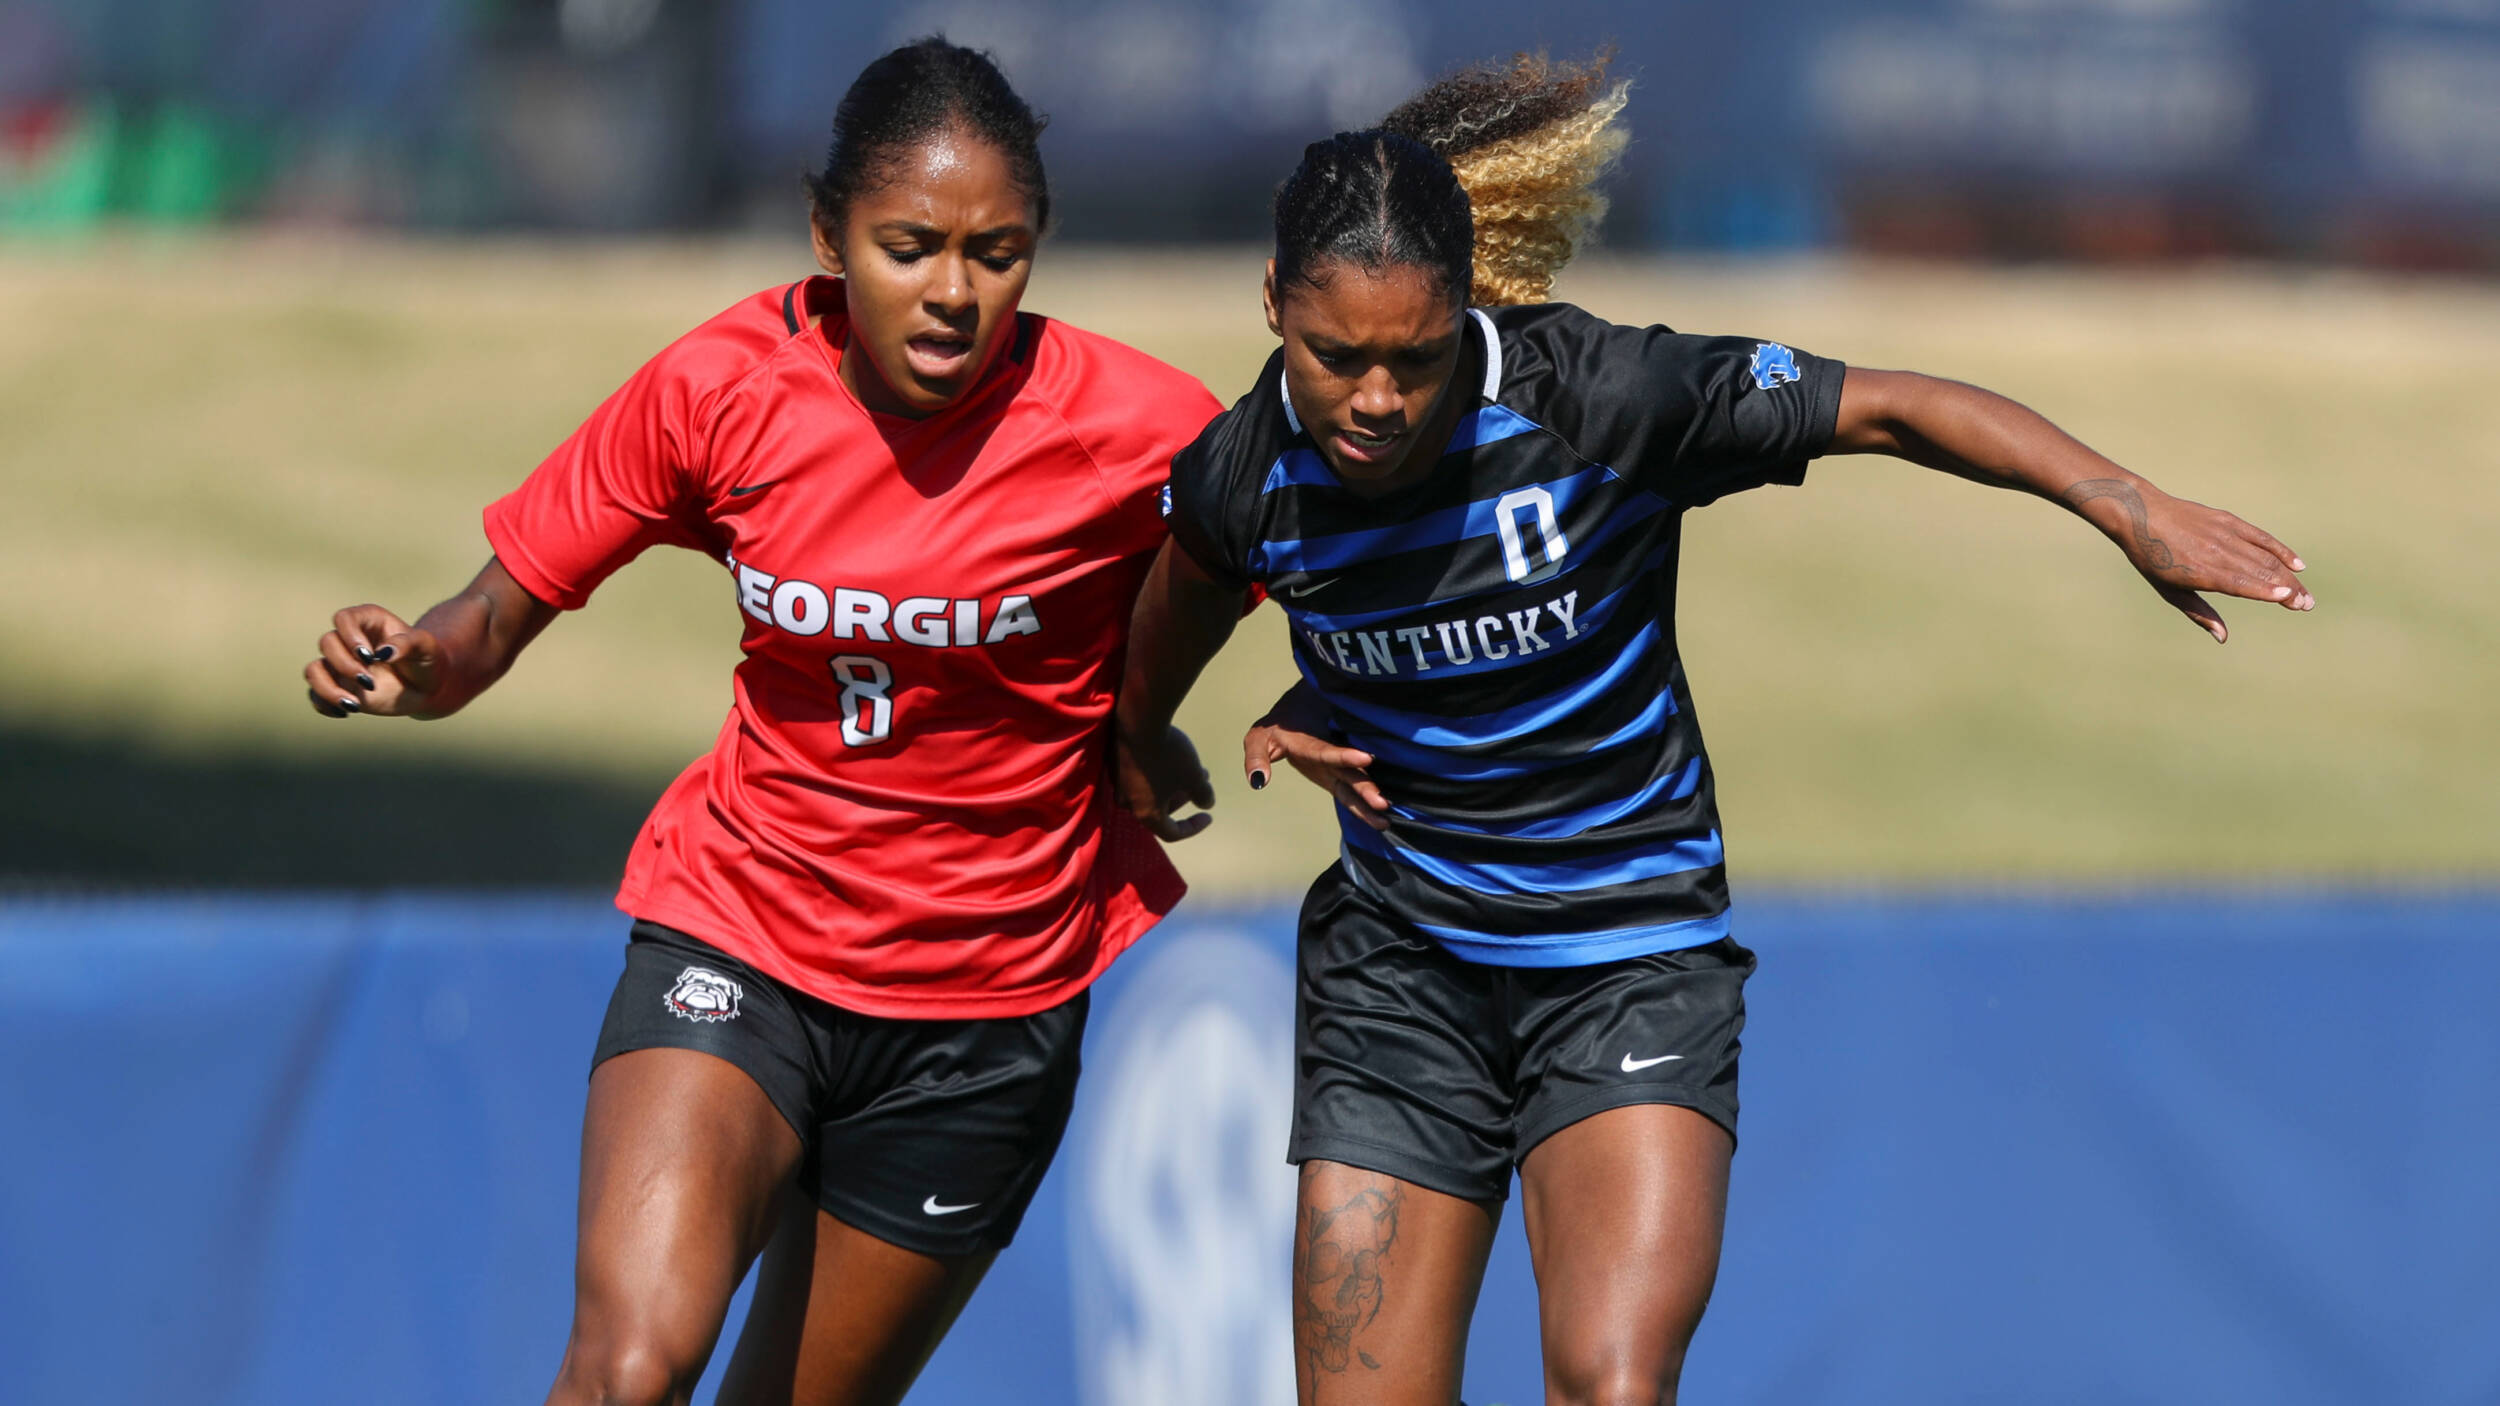 Kentucky Topped by Georgia, 3-0, in Home Finale